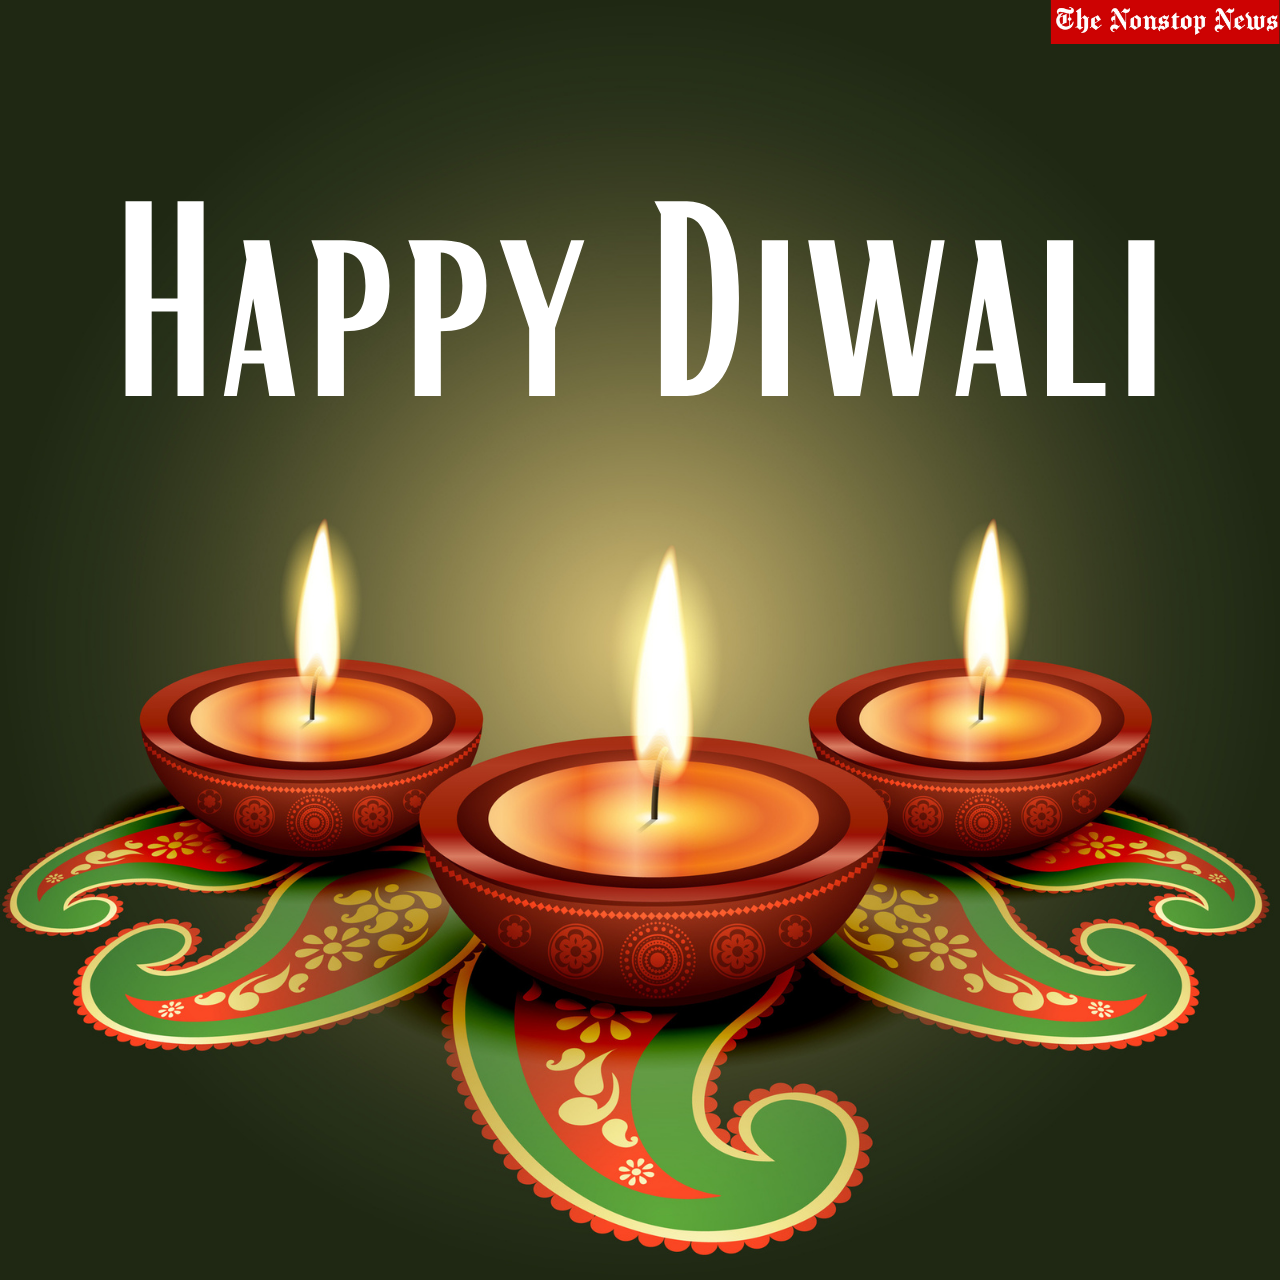 Happy Diwali 2021 Wishes, Quotes, HD Images, Messages, and Greetings for Students or Teachers